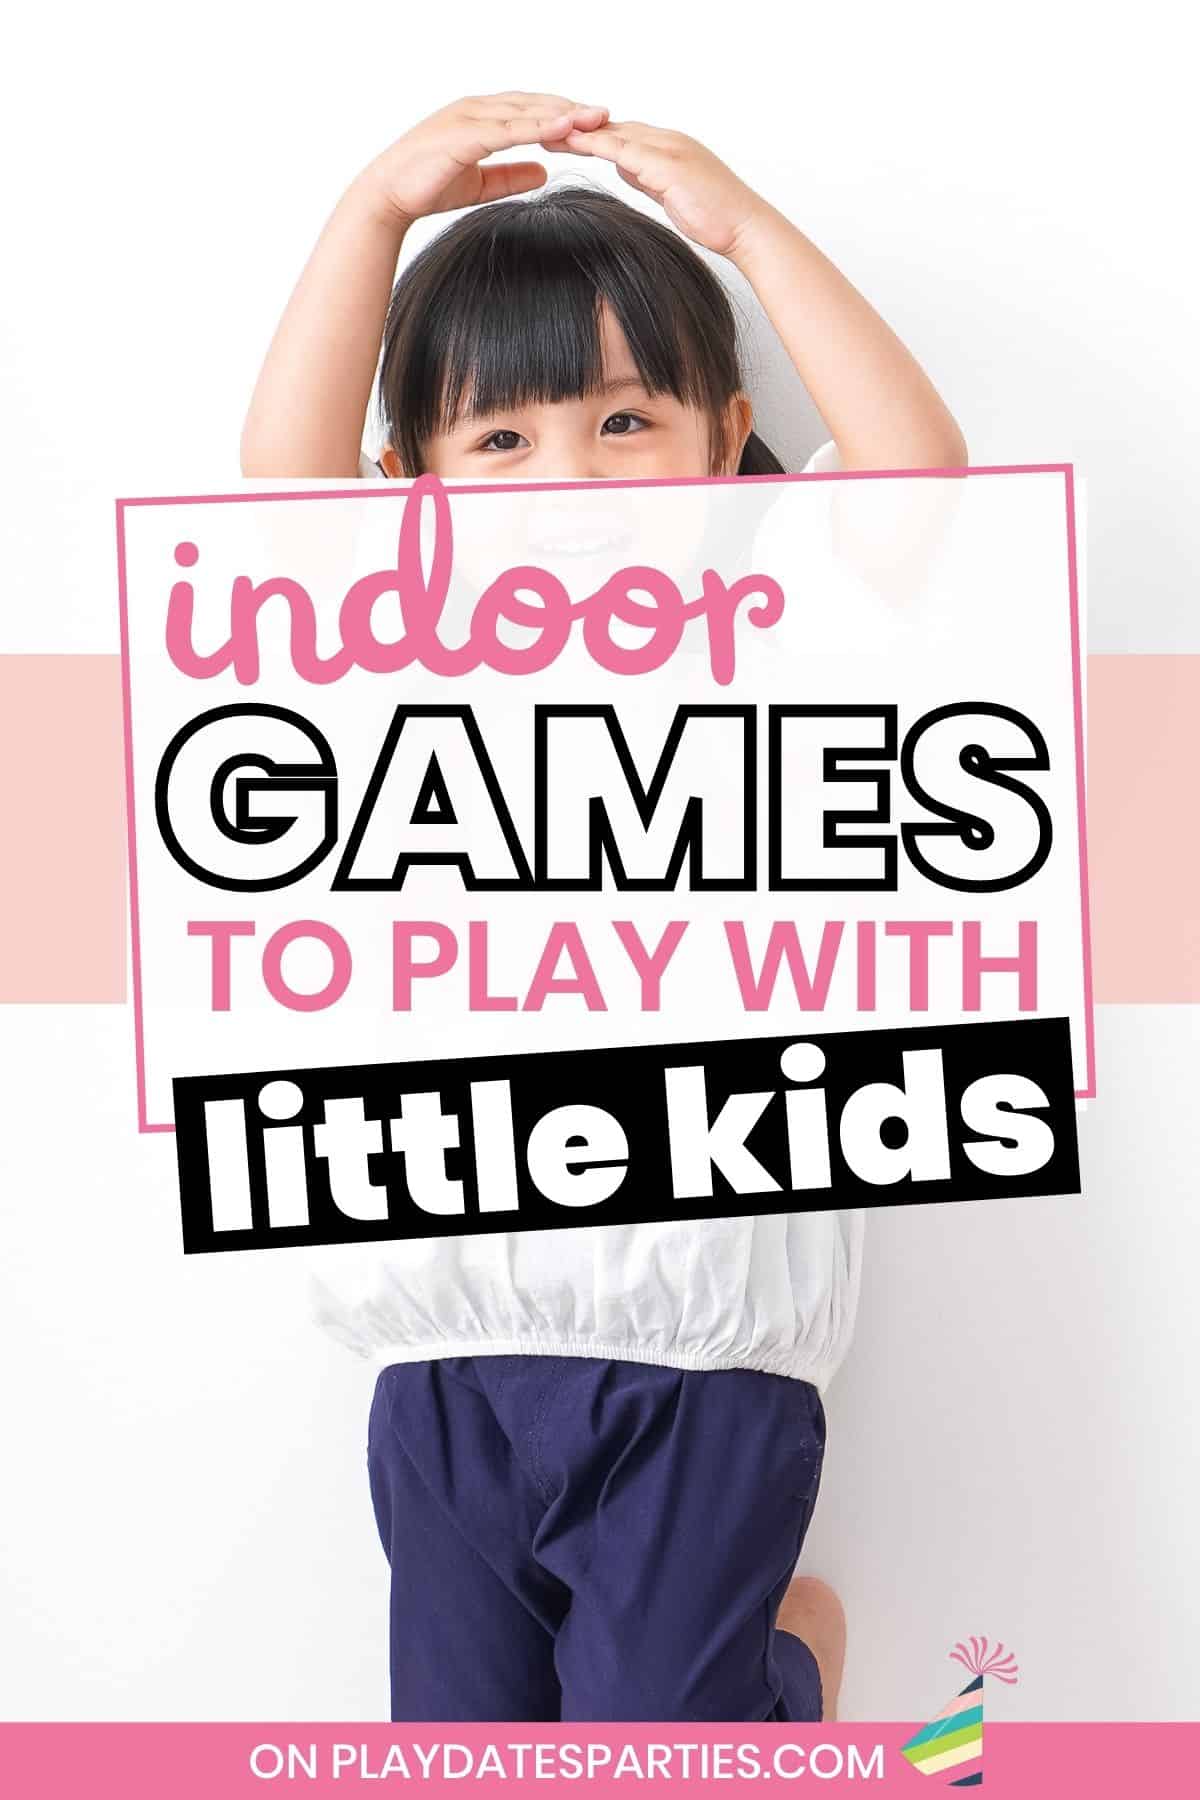 A little girl pretending to be an animal with text overlay indoor games to play with little kids.